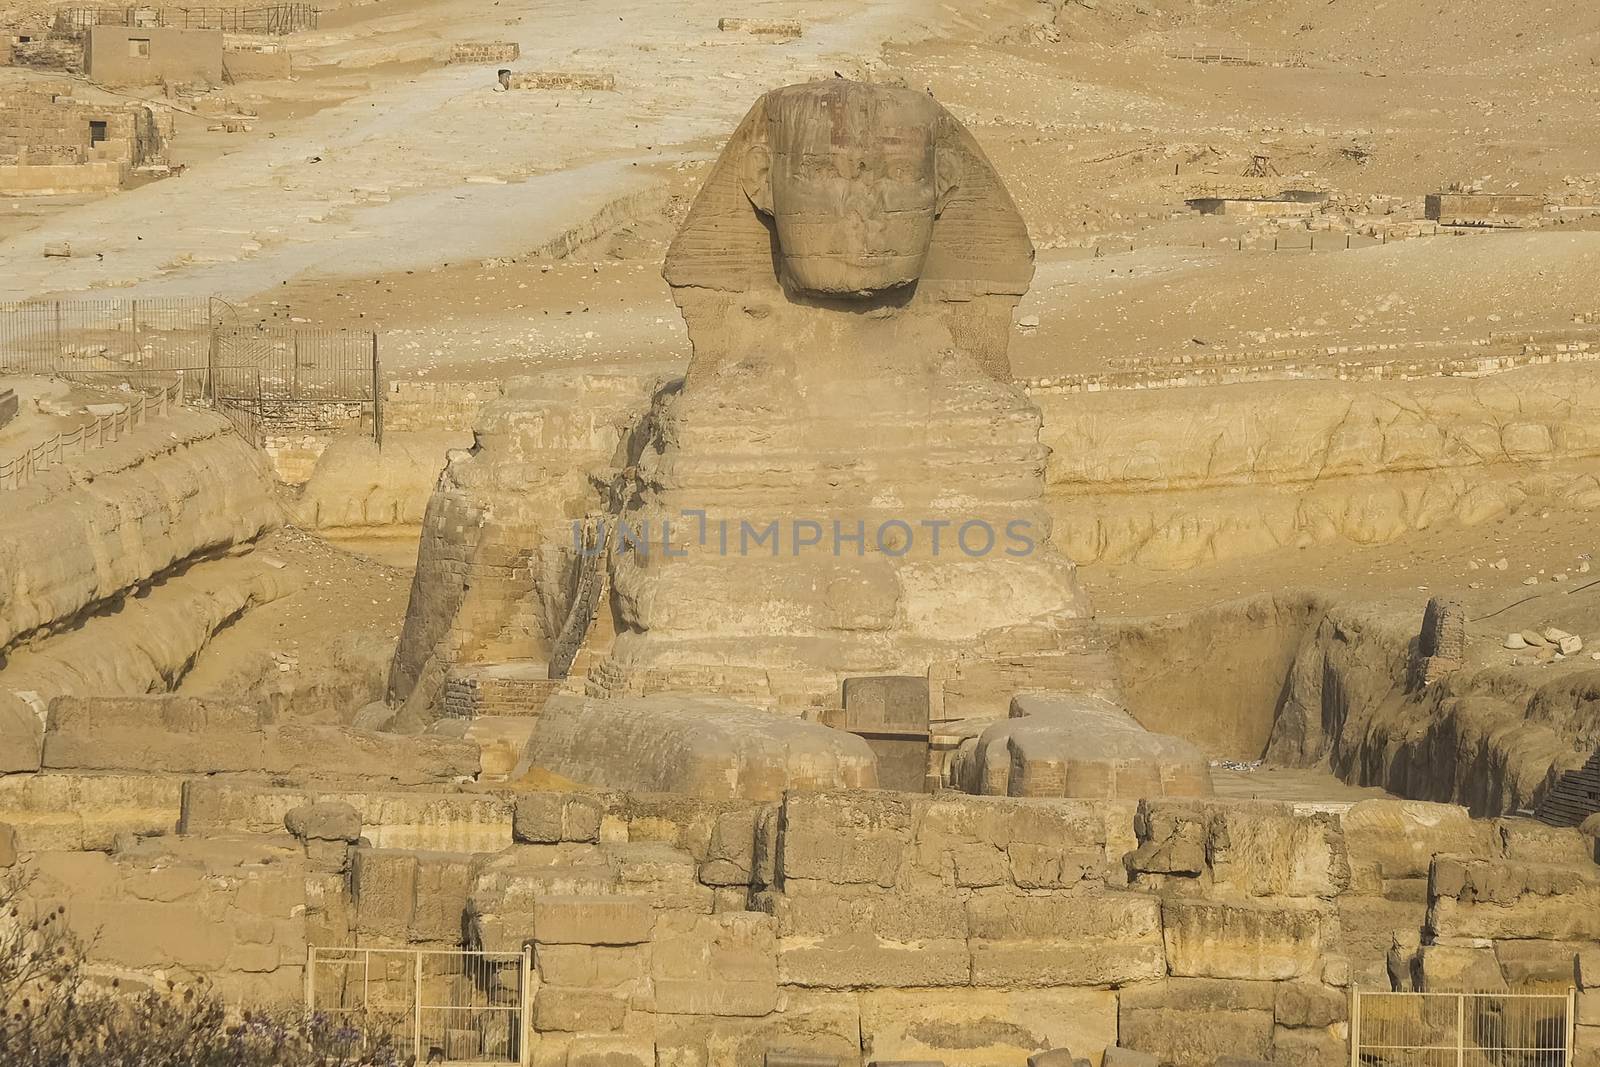 The Great Sphinx. Egyptian Sphinx. The seventh wonder of the world. Ancient megaliths. by nyrok